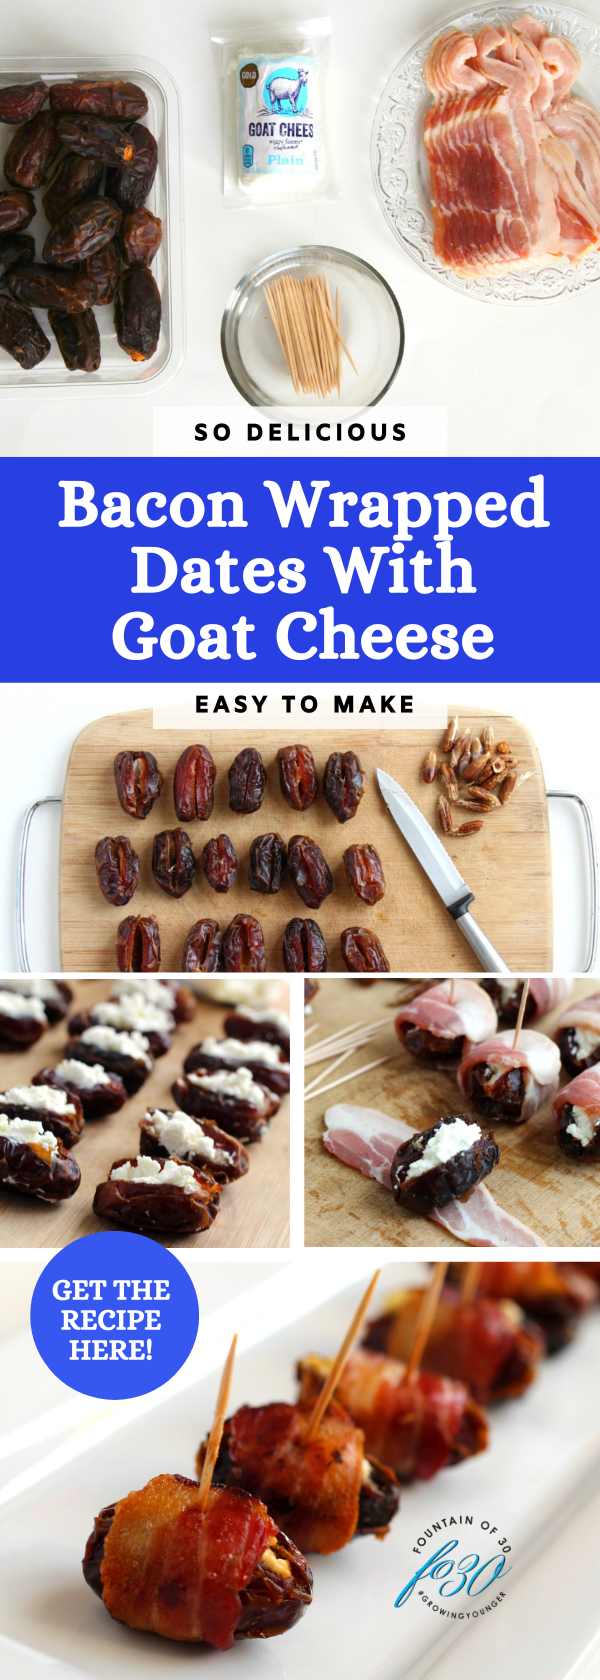 bacon wrapped dates stuffed with goat cheese appetizer fountainof30